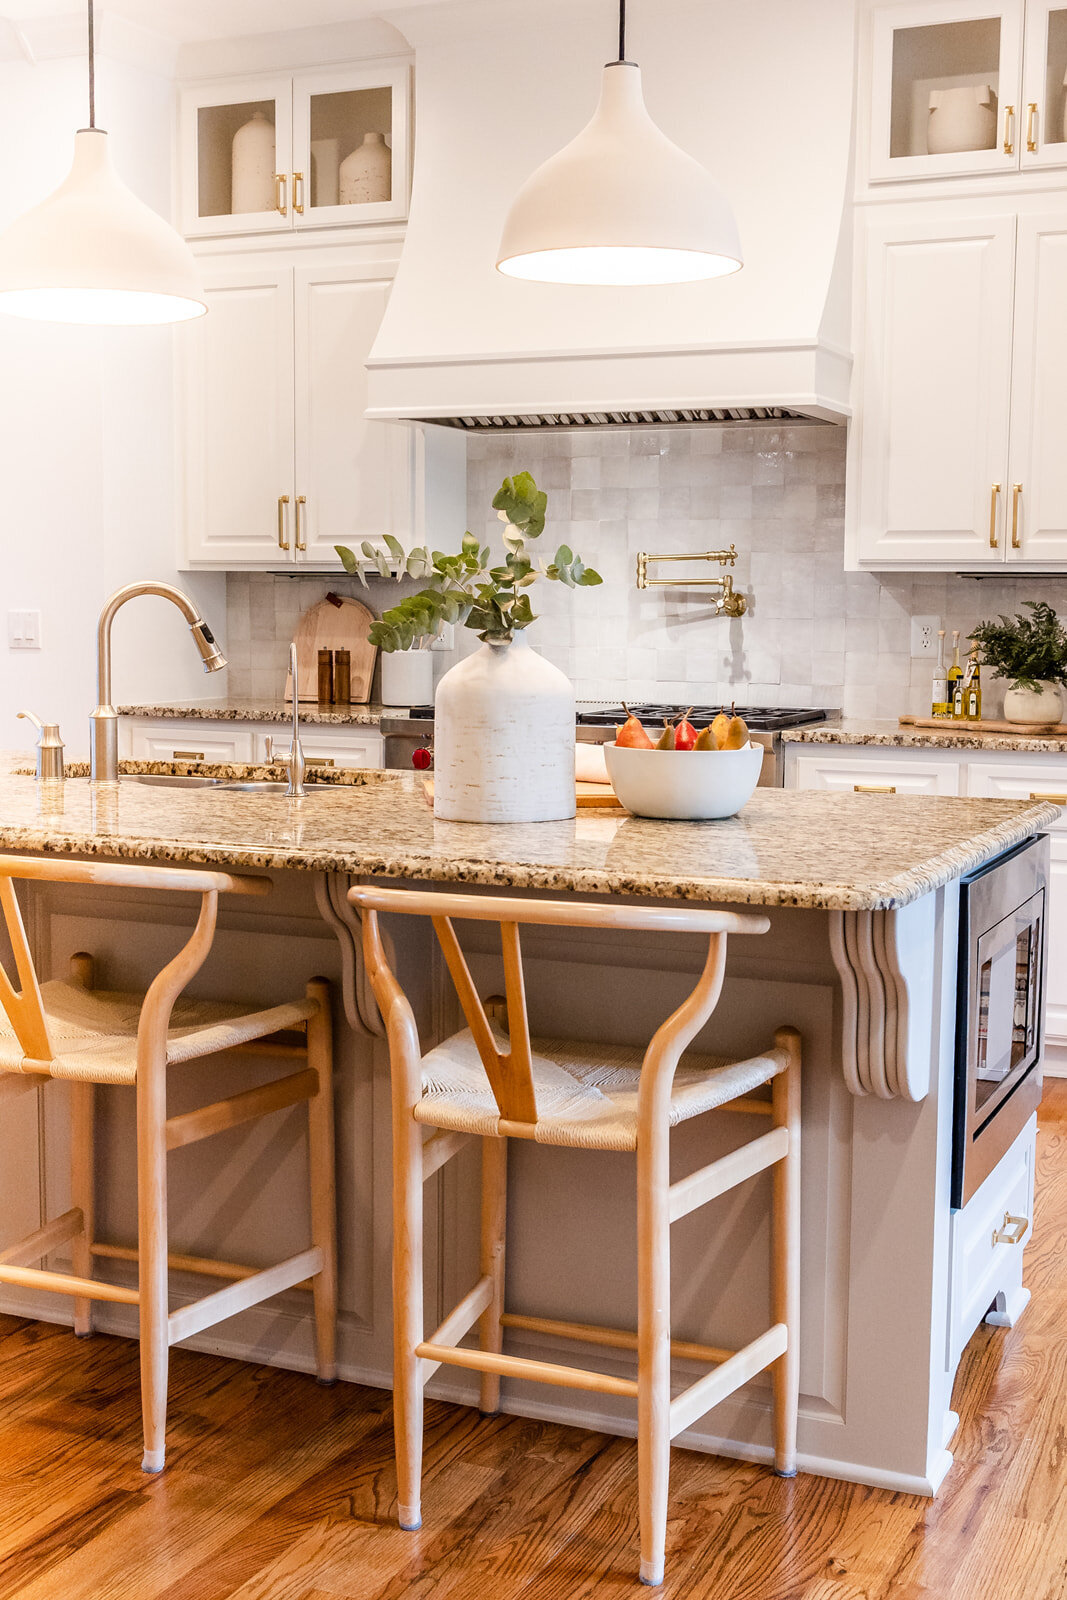 Interior design project of a kitchen Atlanta personal brand photographer | Laure Photography branding